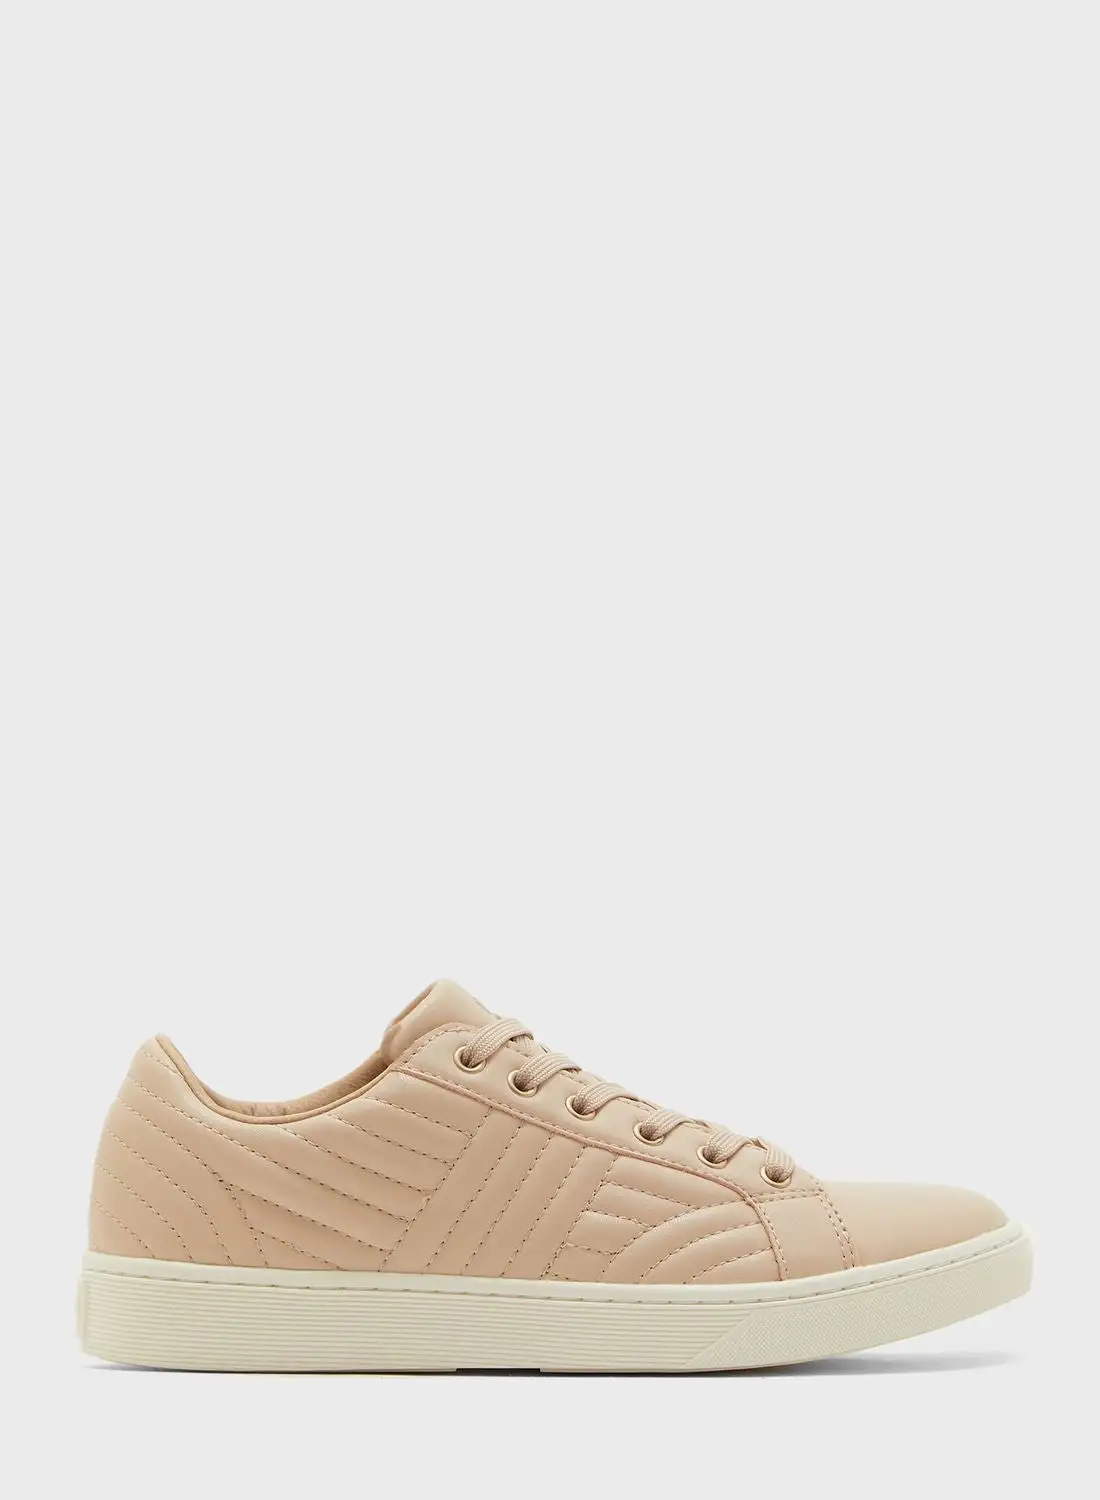 NINE WEST Lace Up Low Top Sneakers